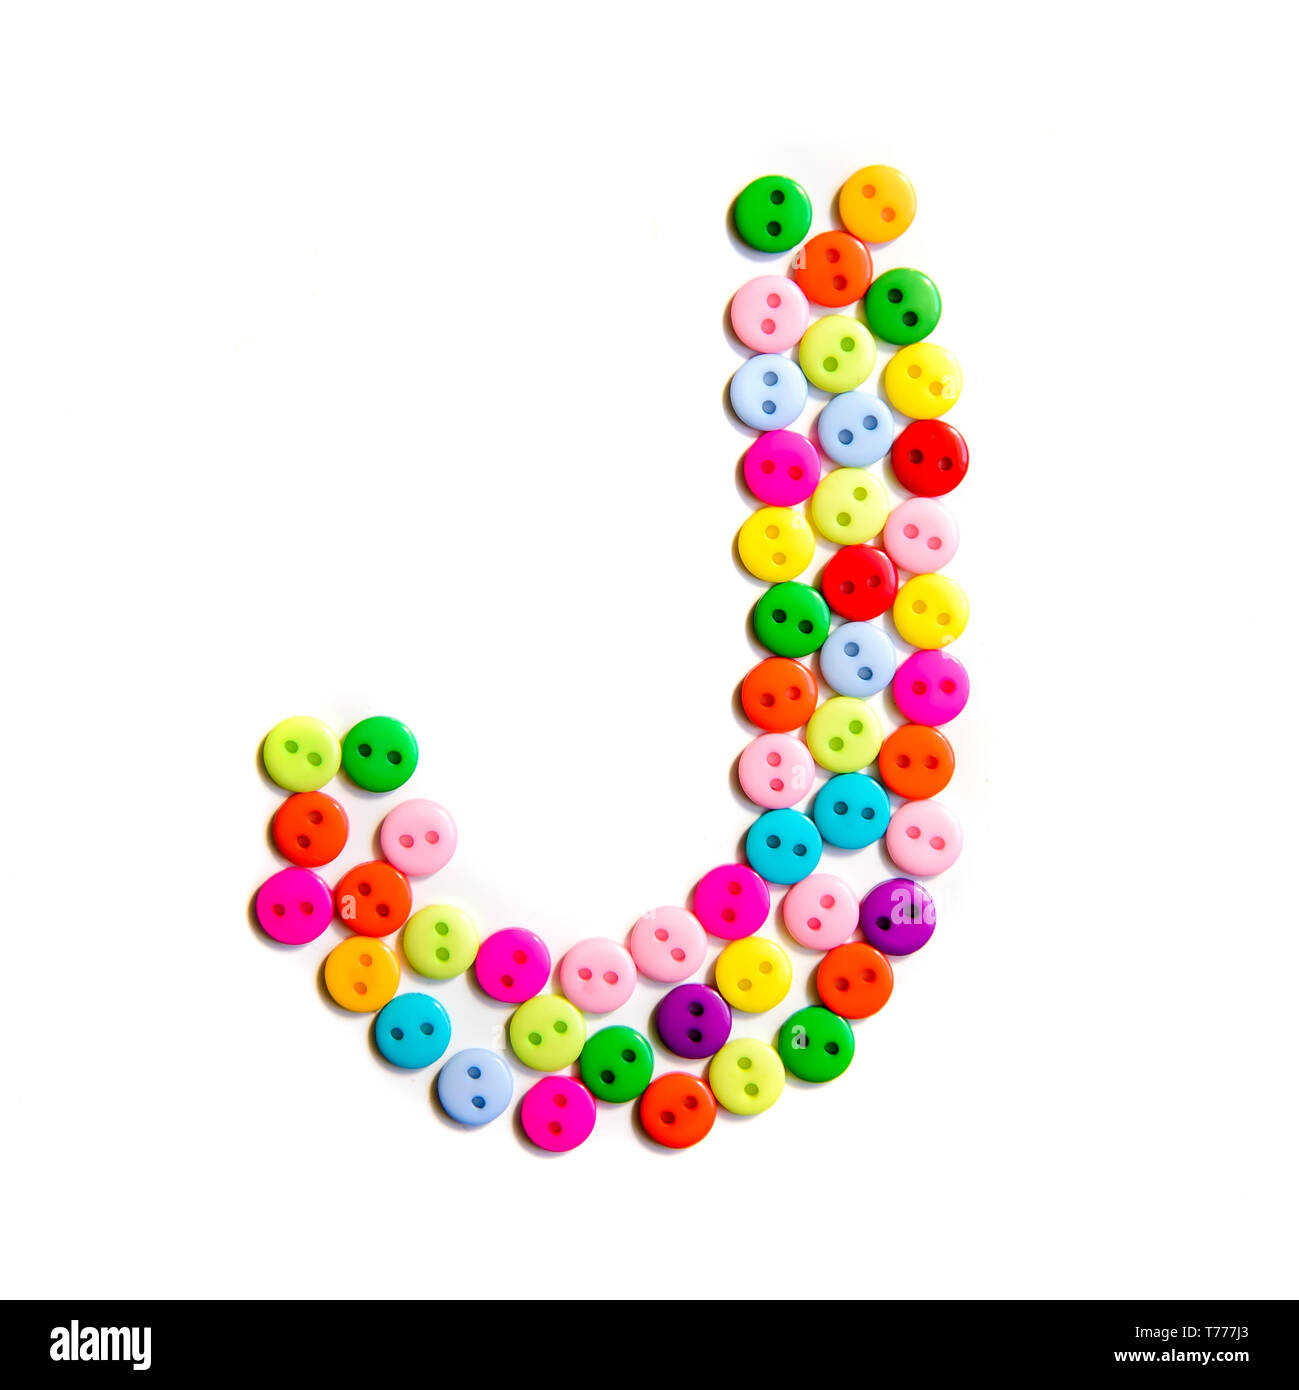 Letter J of the English alphabet from a group of colorful small buttons on a white background Stock Photo